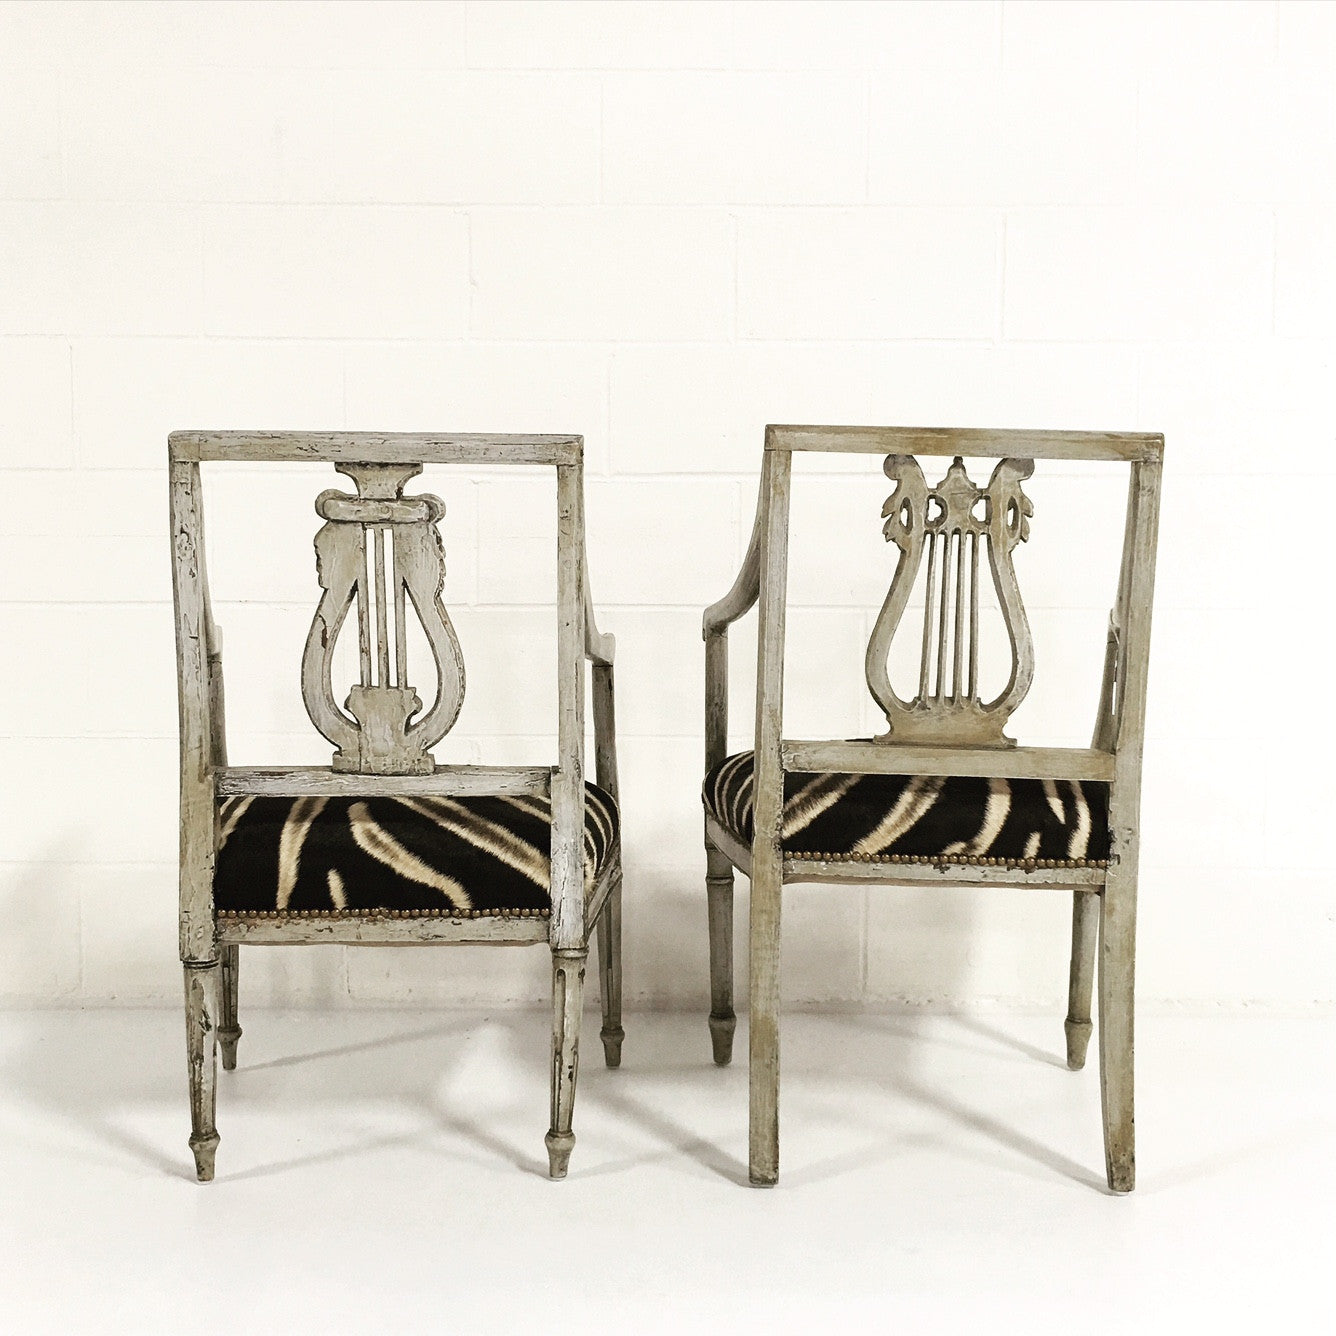 Neoclassical Painted Armchairs in Zebra Hide - FORSYTH